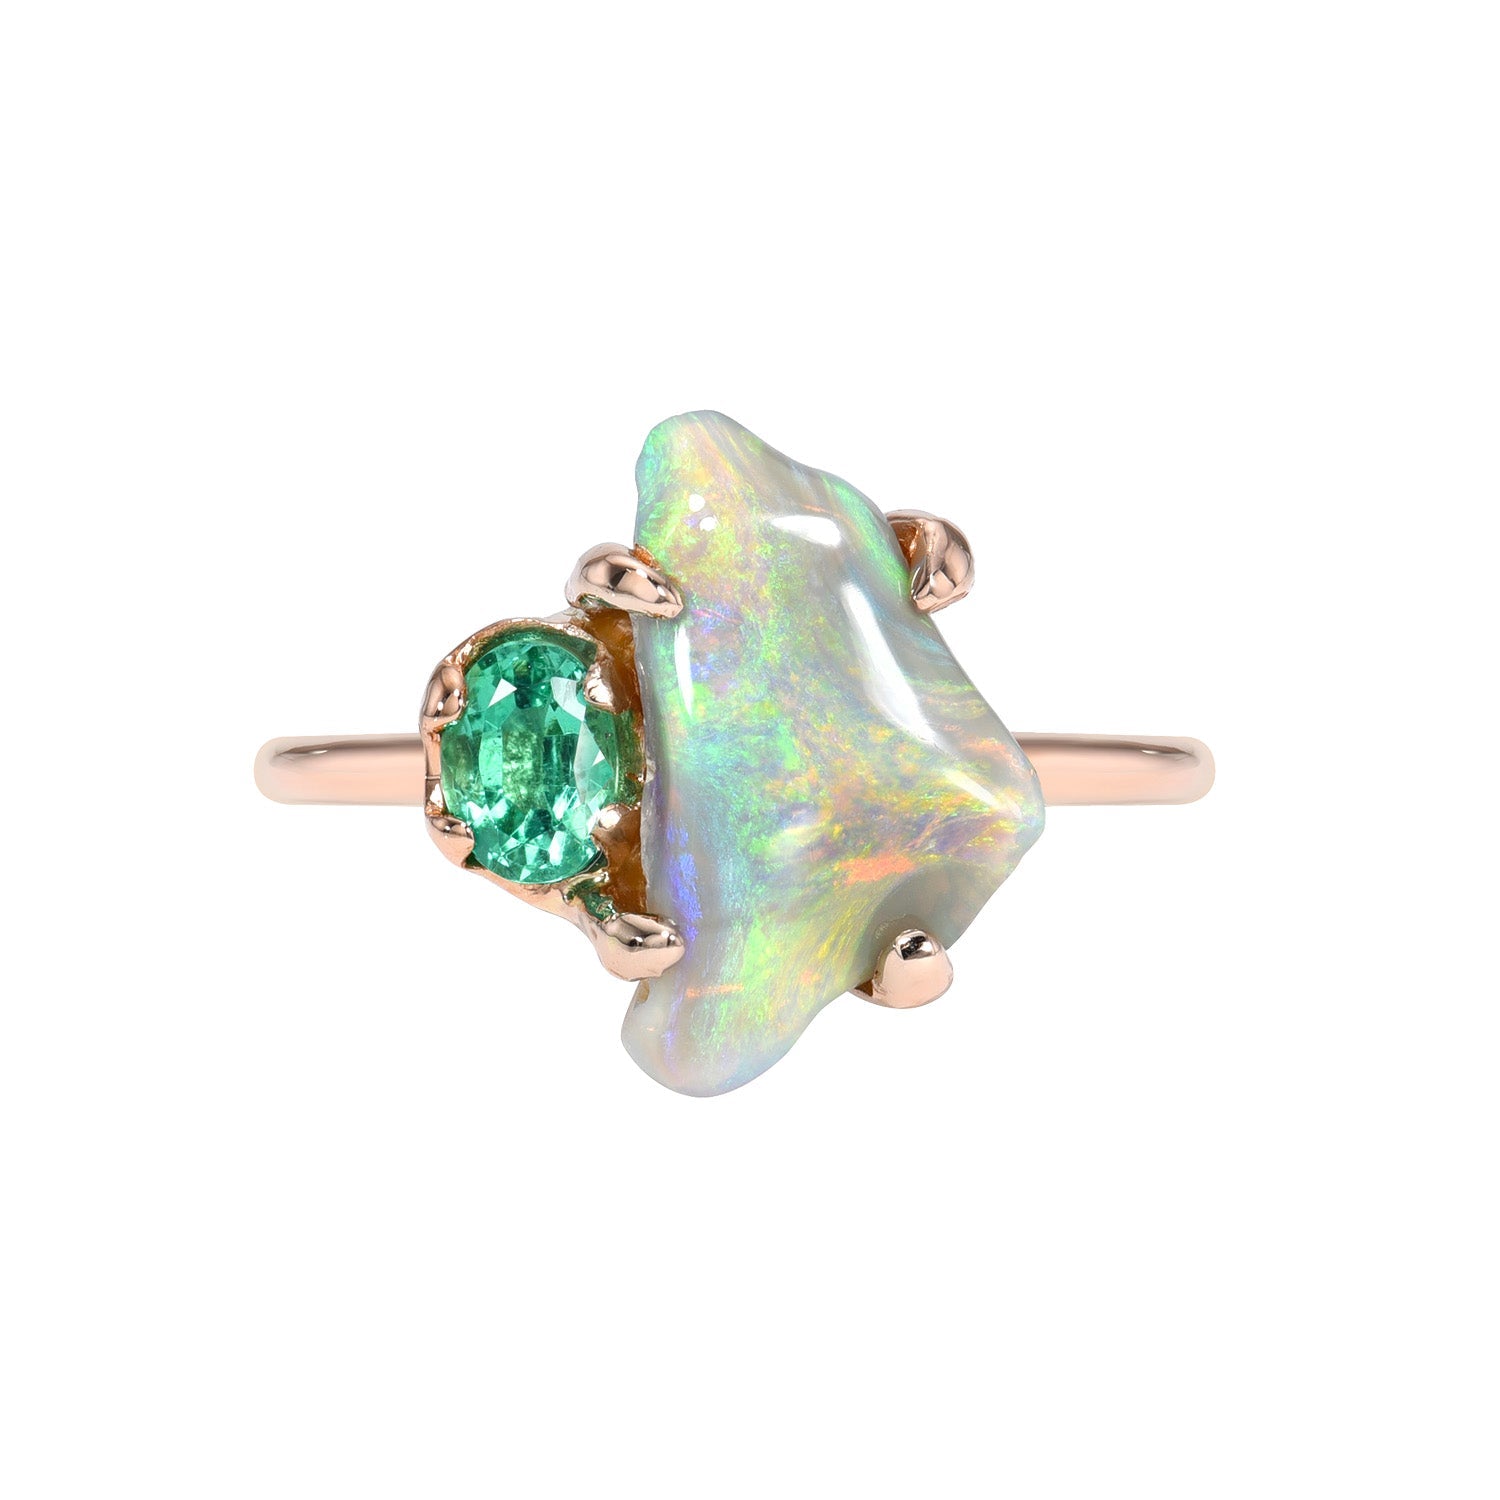 An Opal and Emerald Ring by NIXIN Jewelry shown against a white background. One of a kind Black Opal Ring.